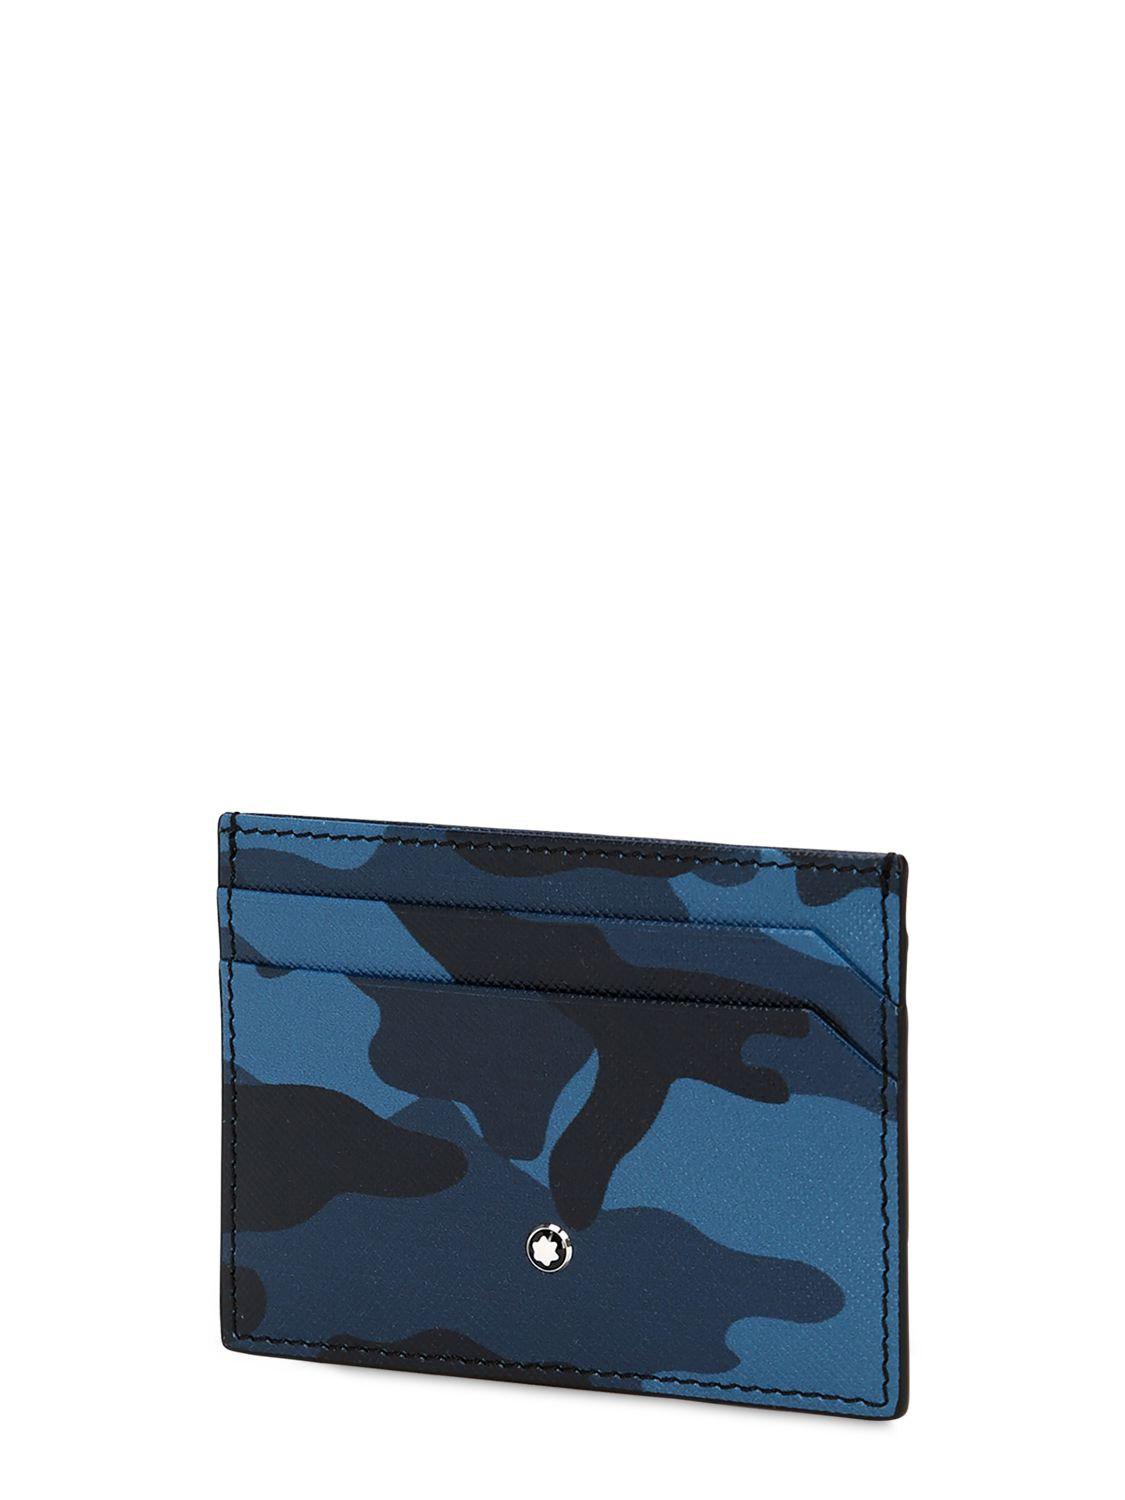 Montblanc Camouflage Leather Card Holder in Blue Camo (Blue) for Men | Lyst